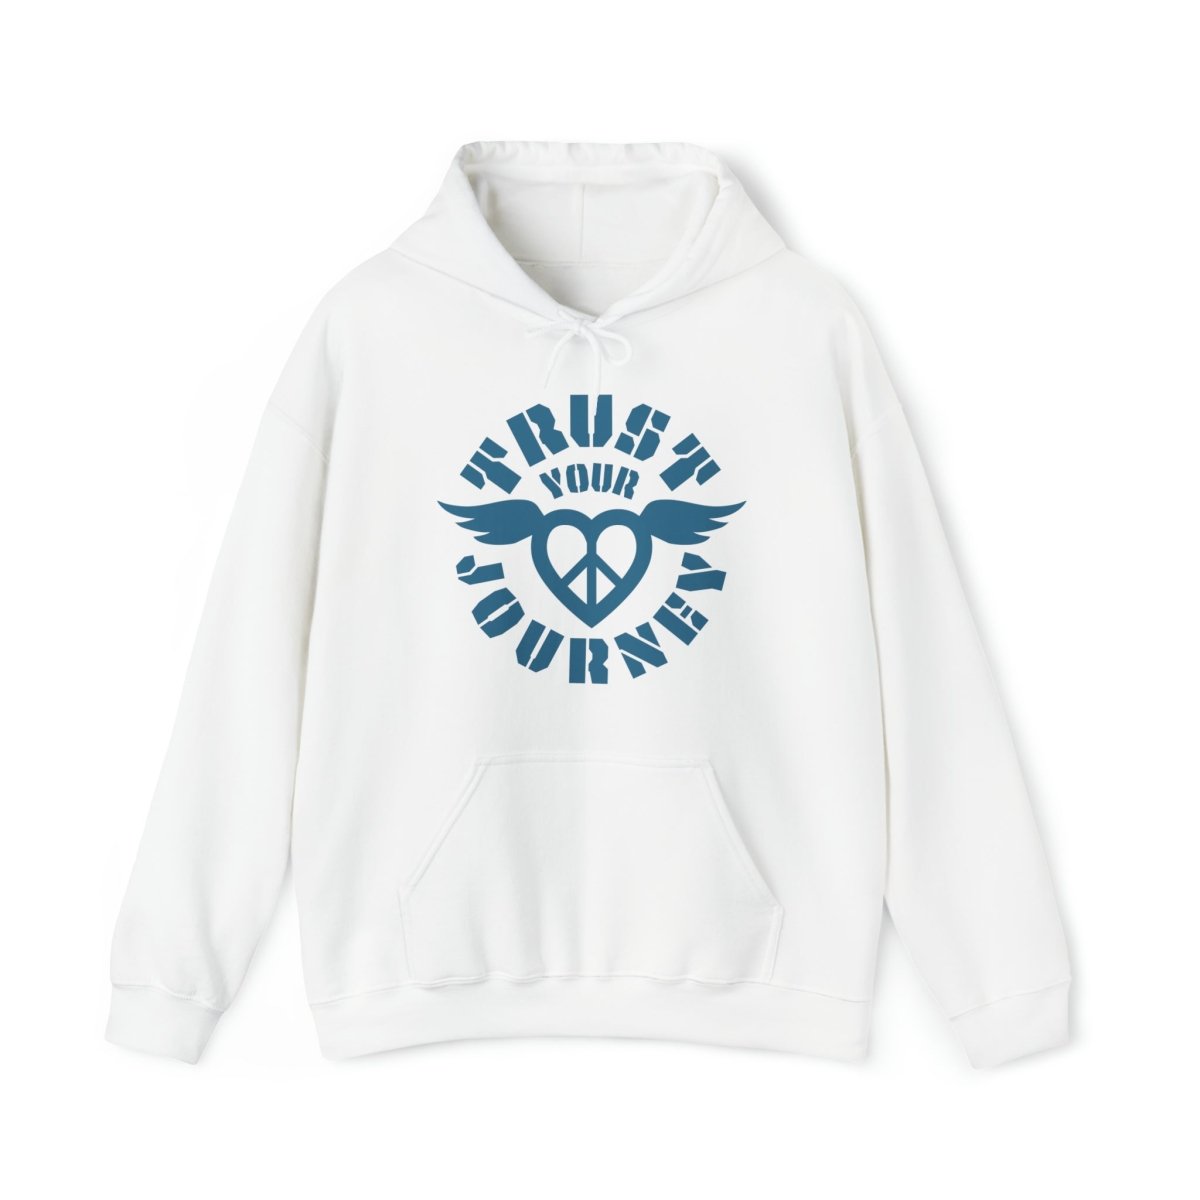 Trust Your Journey, Peace Love Winged Fleece Hoodie, Live A Brave Story